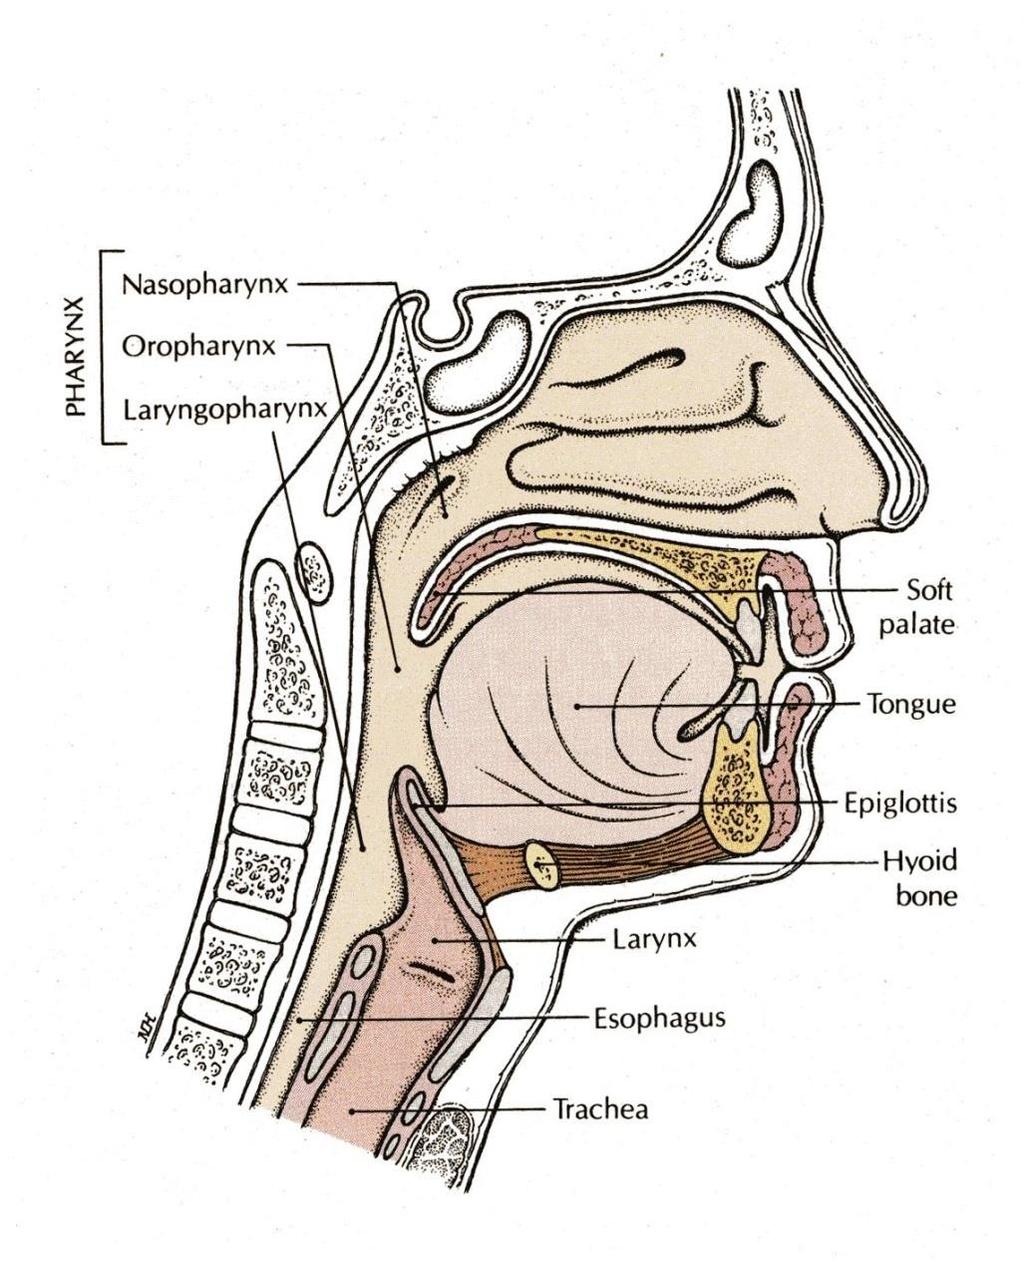 MOVEMENTS OF SOFT PALATE Pharyngeal isthmus: (It is the communication between nasal and oral parts of the